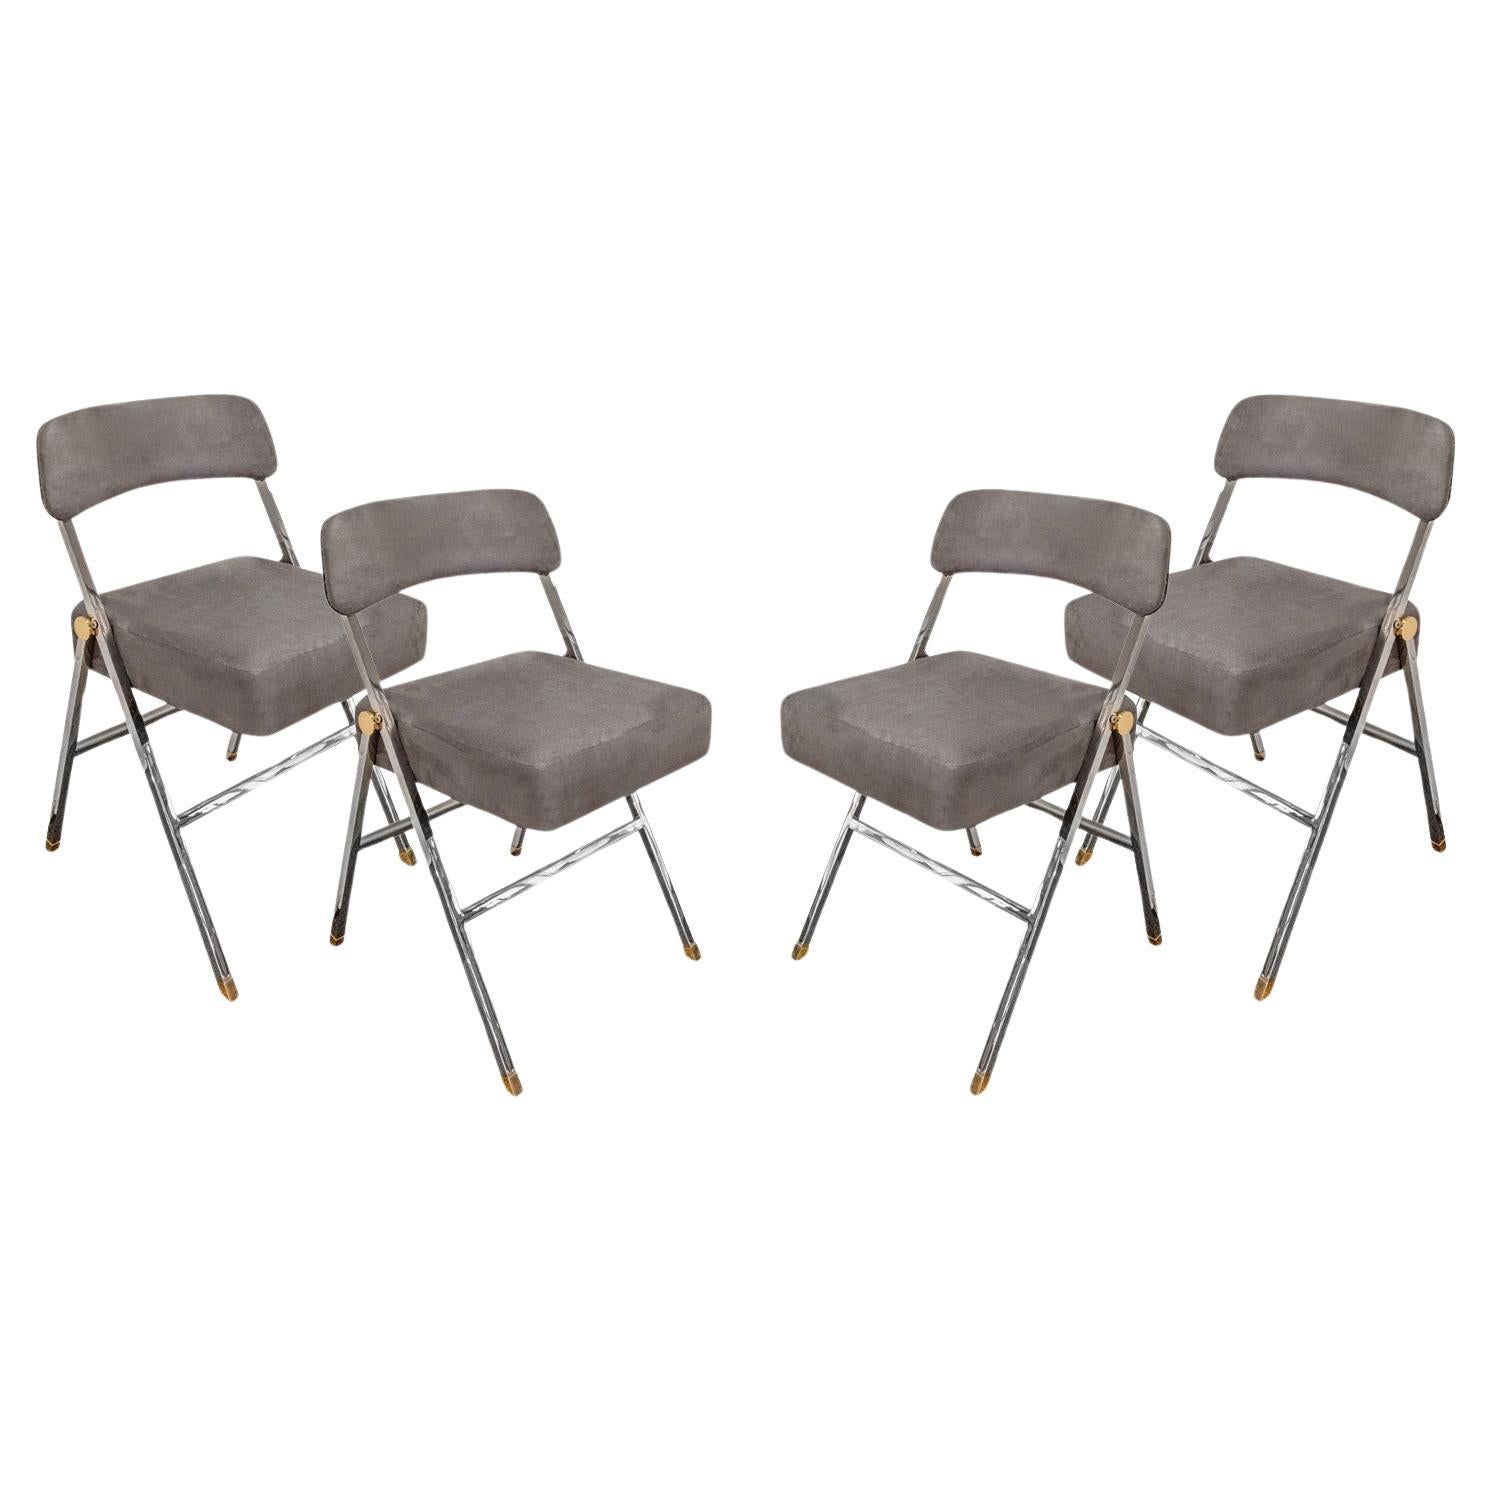 Karl Springer Rare Set of 4 Folding Chairs with Polished Chrome and Brass 1980s